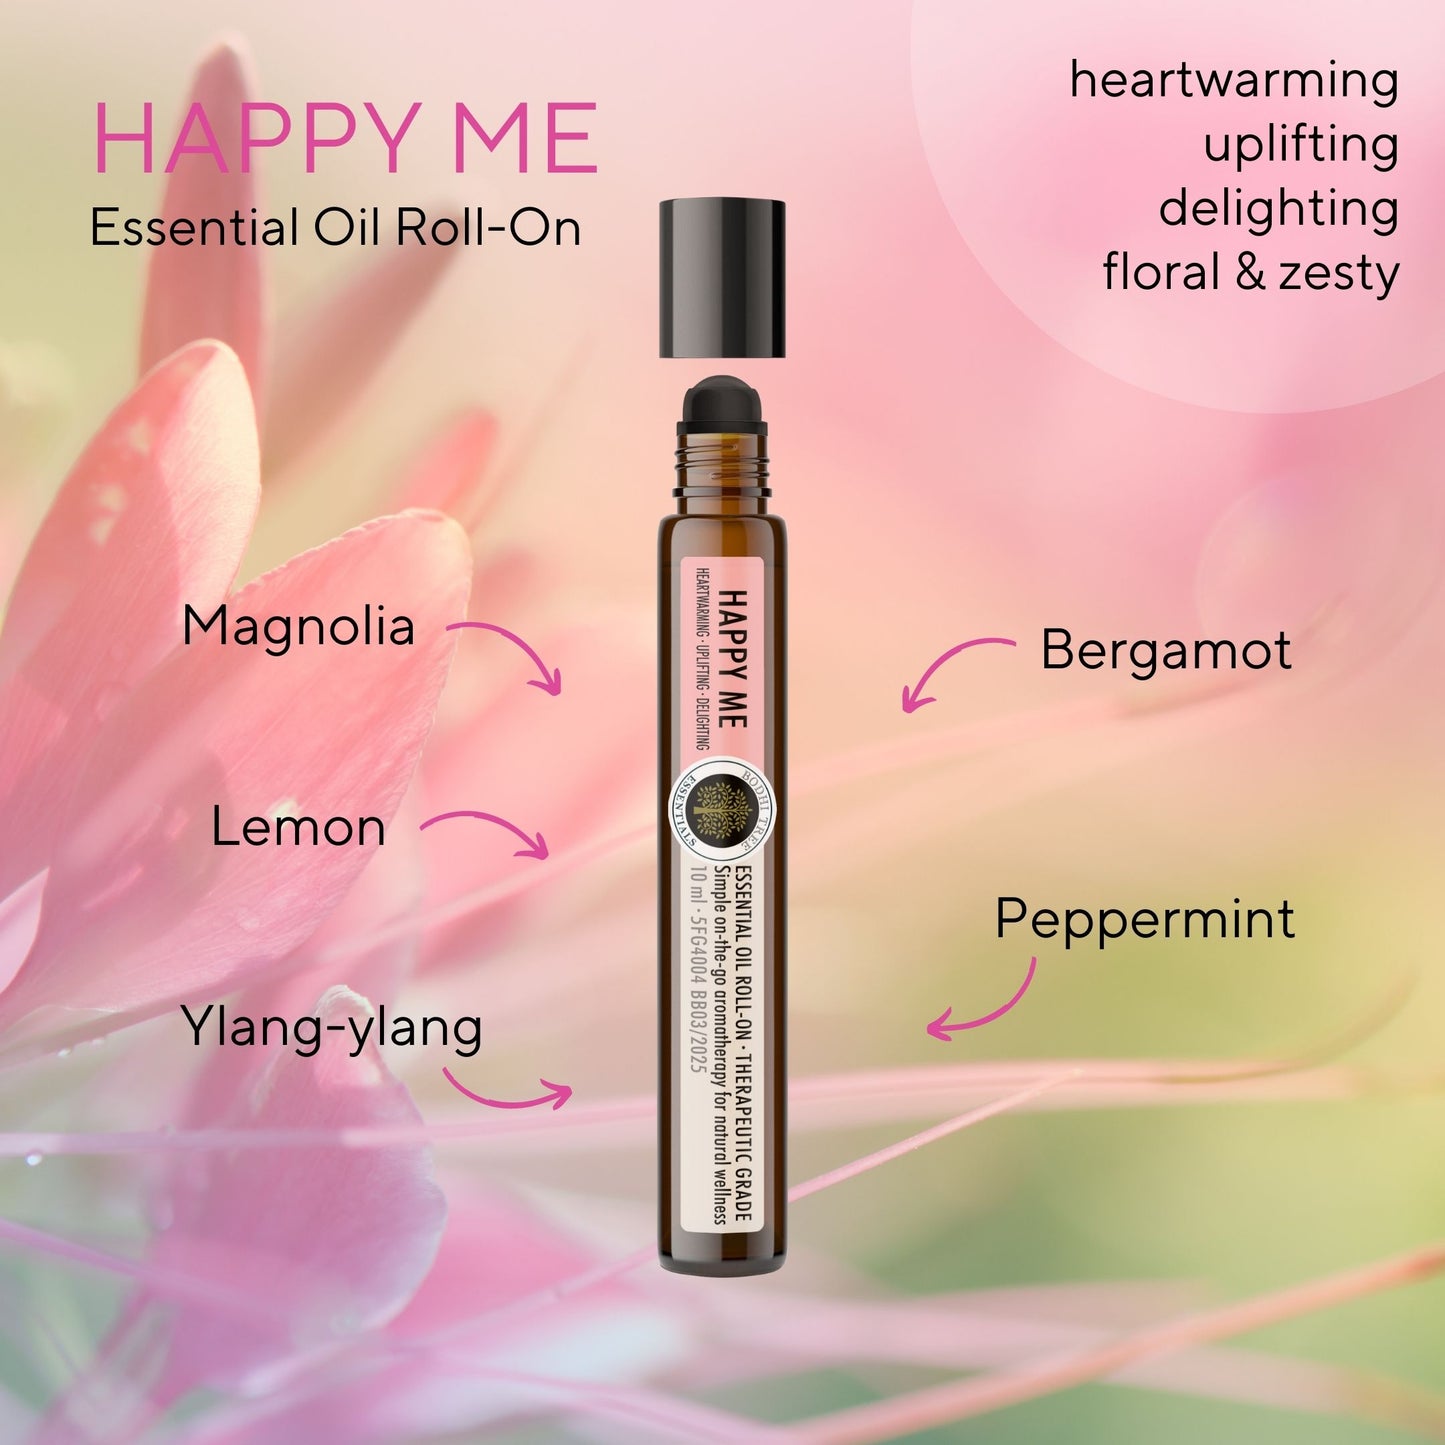 Bodhi Tree Essential Oil Roll-On Happy Me